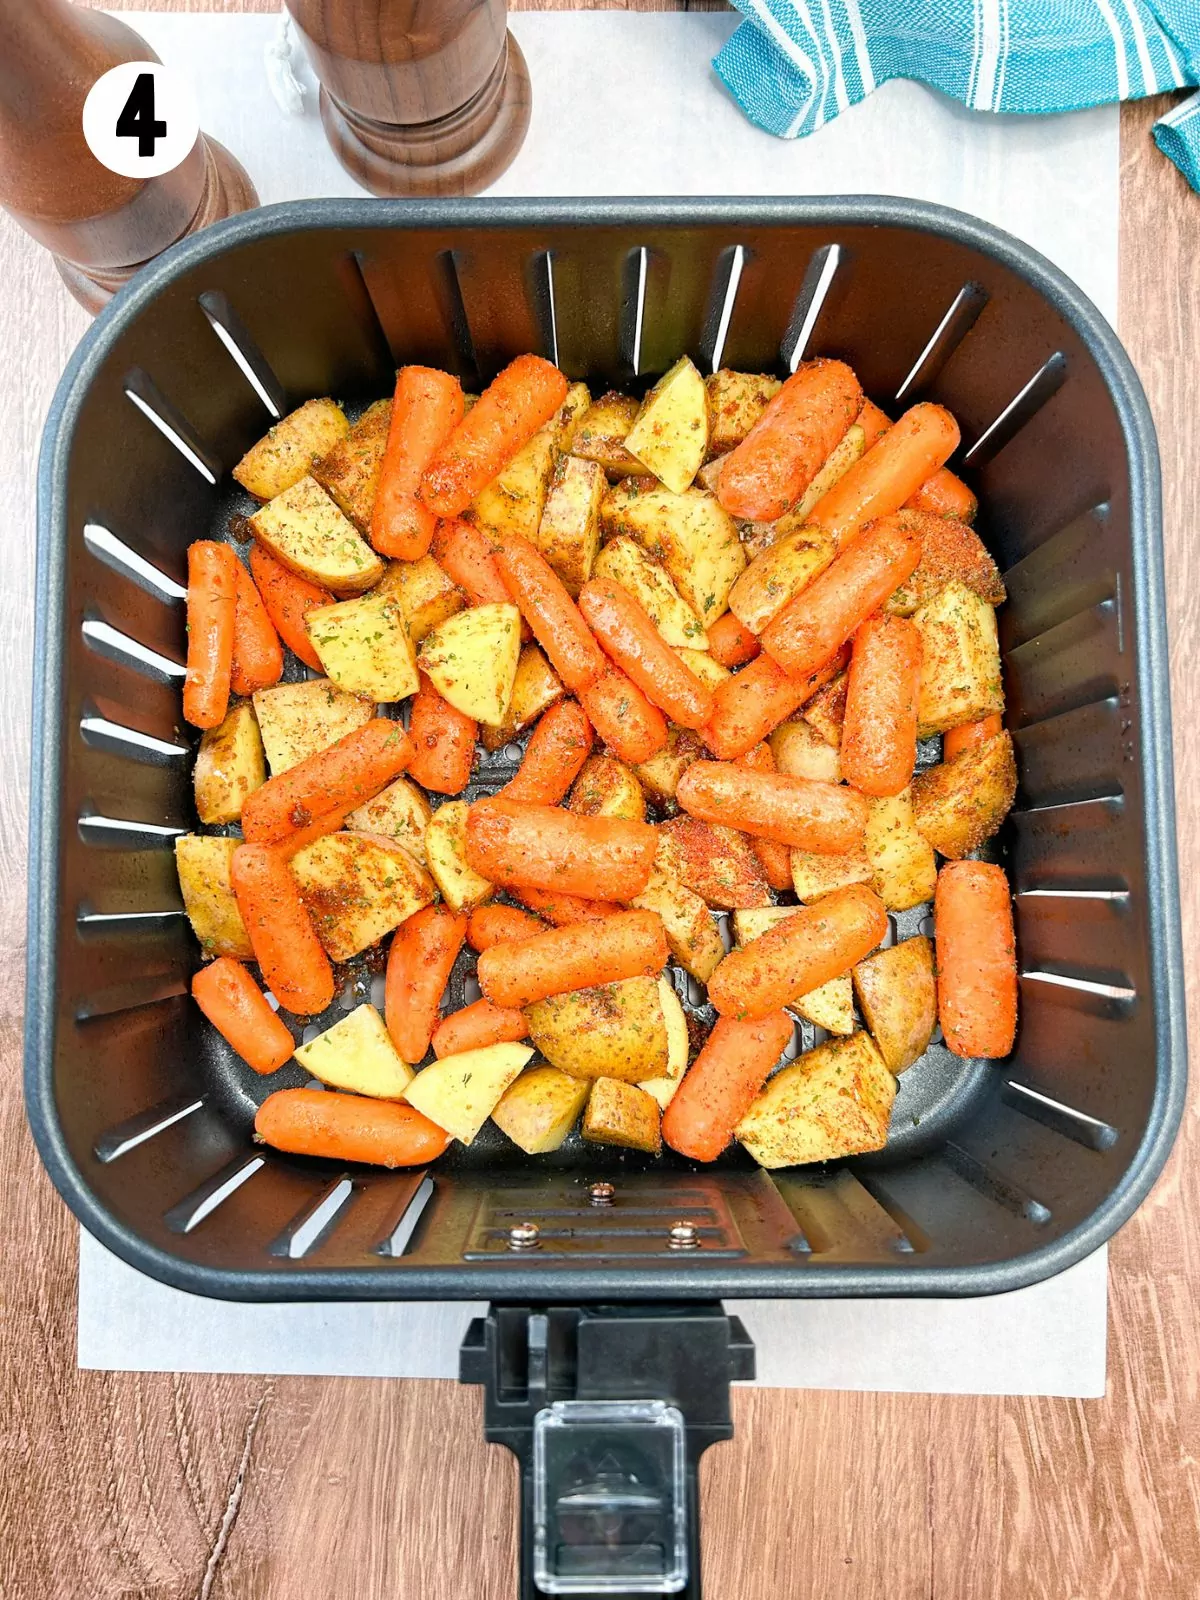 how long to cook potatoes and carrots in air fryer.